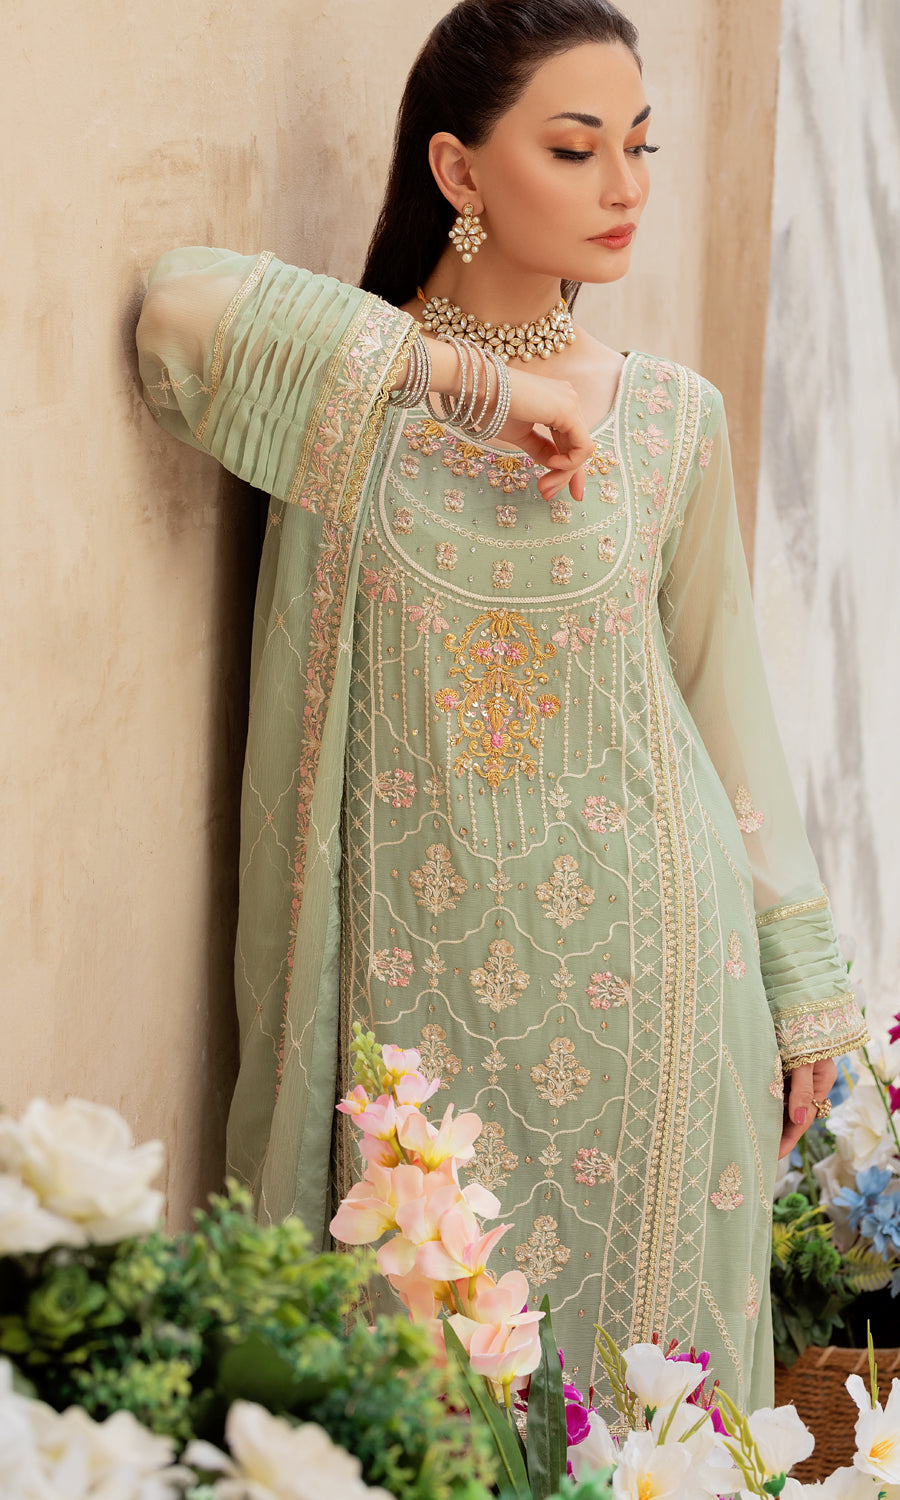 Shamooz. Mushq Volume 3. Step into elegance with this masterpiece with vibrant color and embrodiery work on the front and side panel that enhances a pop of color and elevate the design.The delicately hand-embellished adds a touch of glamour.This ensemble is a perfect balance of elegance.